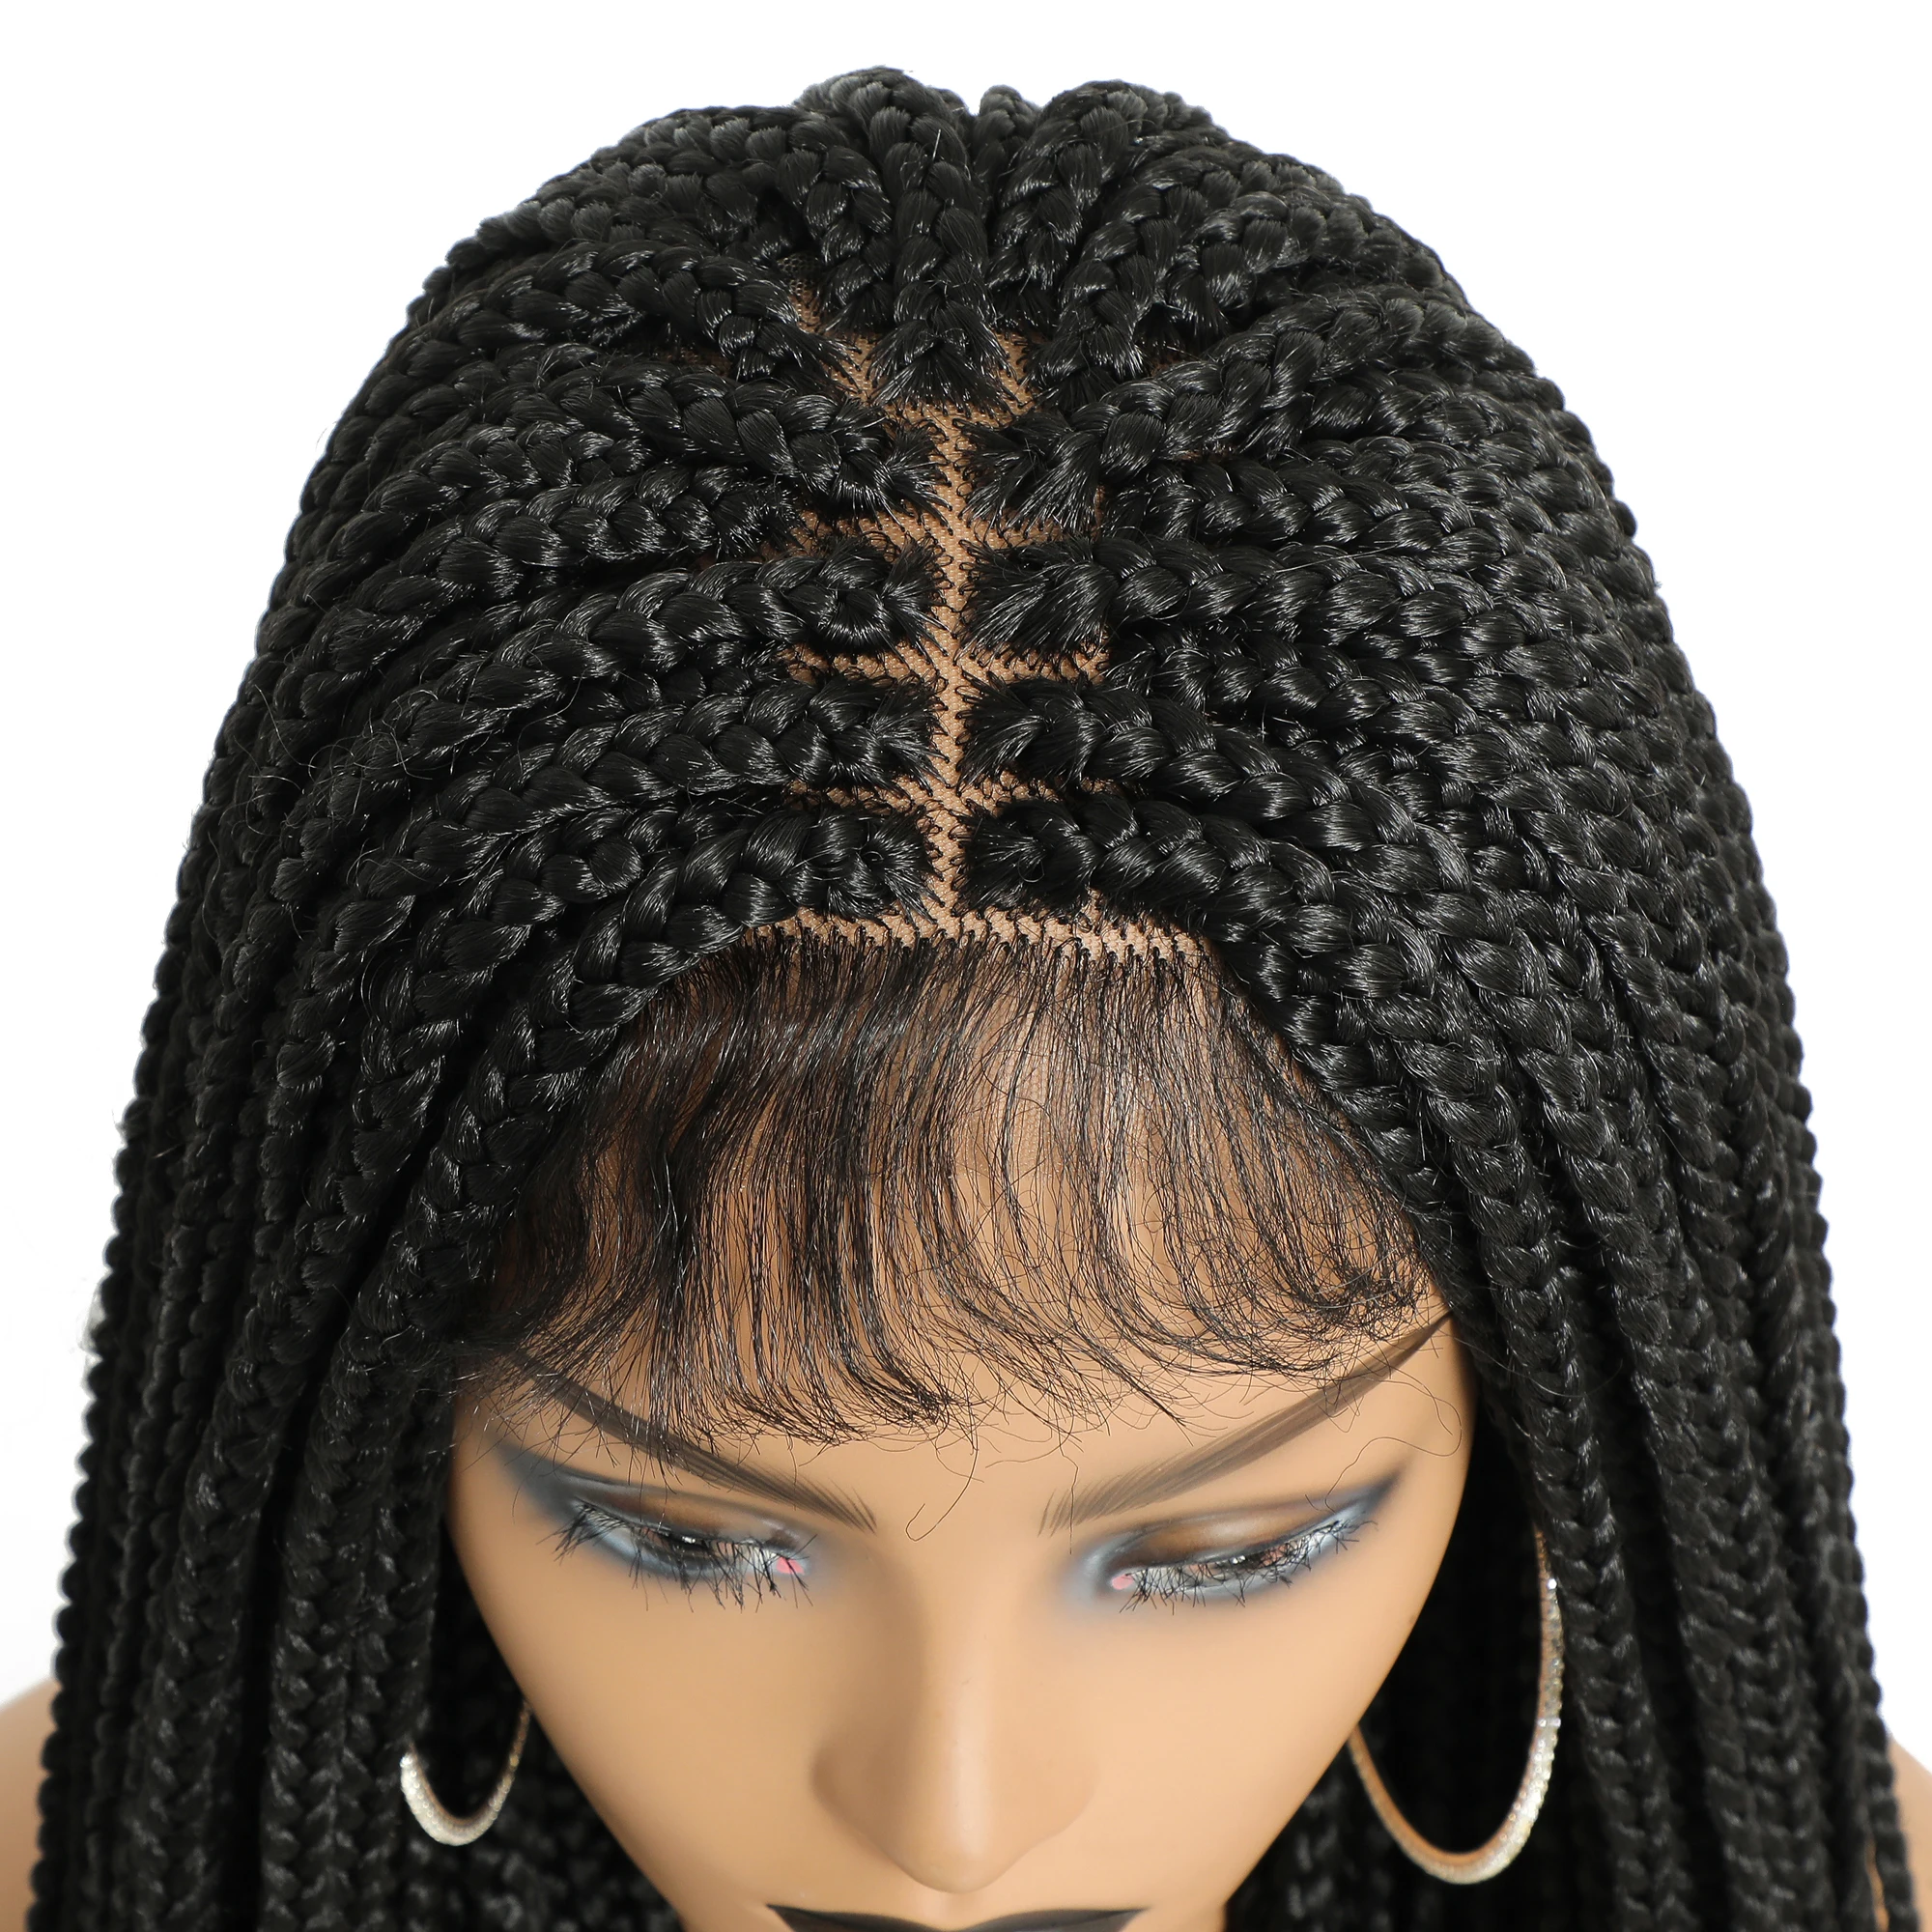 4x4 Lace Box Braided Wigs With Baby Hair 30 Inch Long Twist Braids Lace Front Wigs For Black Women Synthetic Braiding Hair Wig